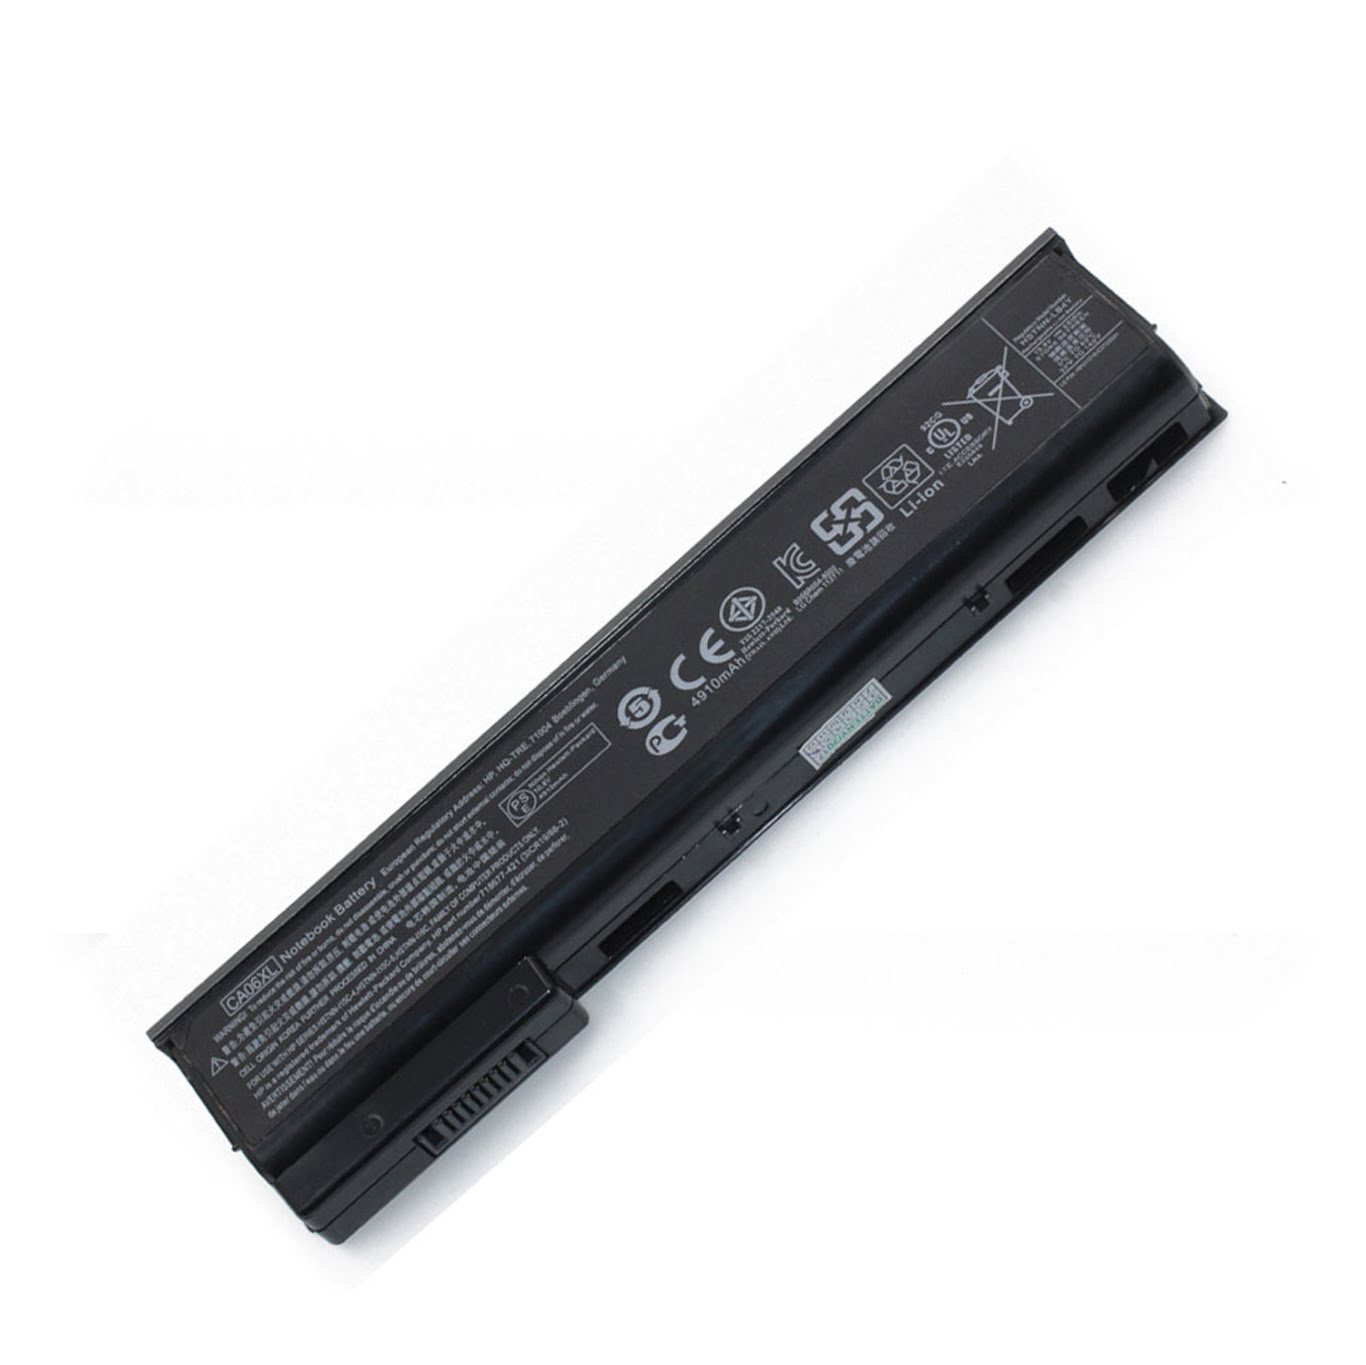 718754-001, 718755-001 replacement Laptop Battery for HP ProBook 640, ProBook 640 G0, 10.8V, 4910mah / 55wh, 6 cells